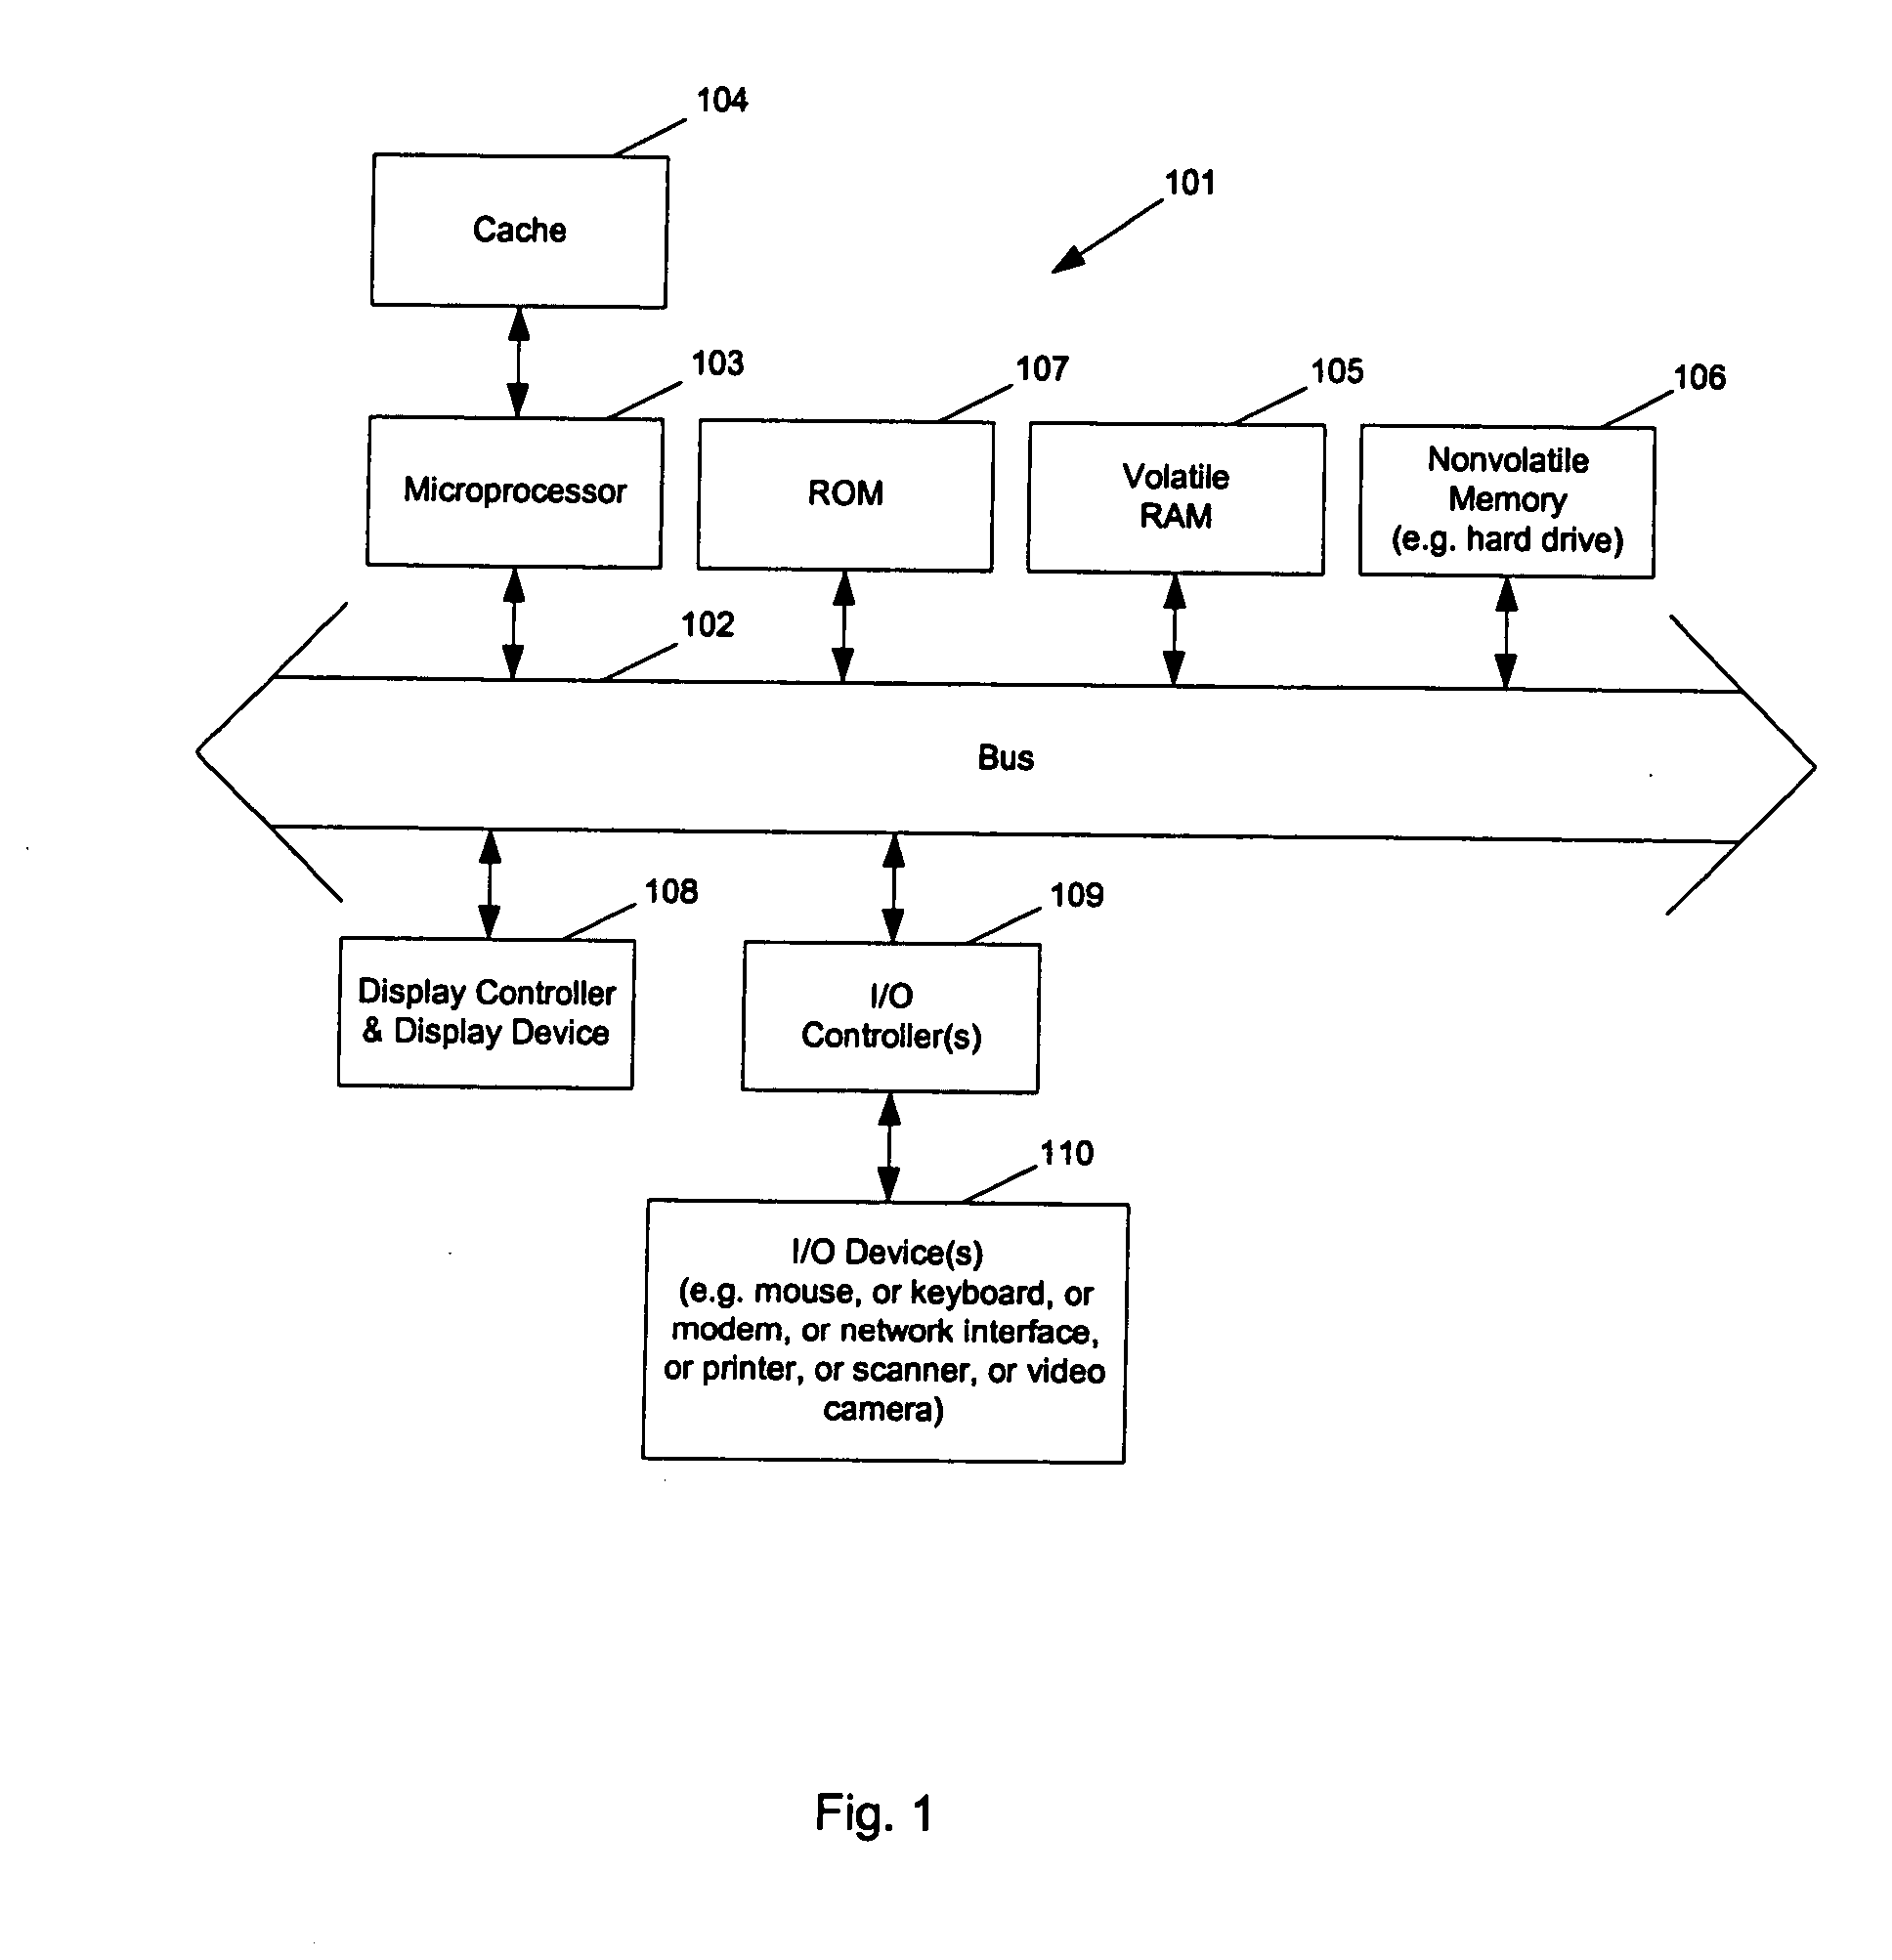 Method and apparatus for resizing buffered windows